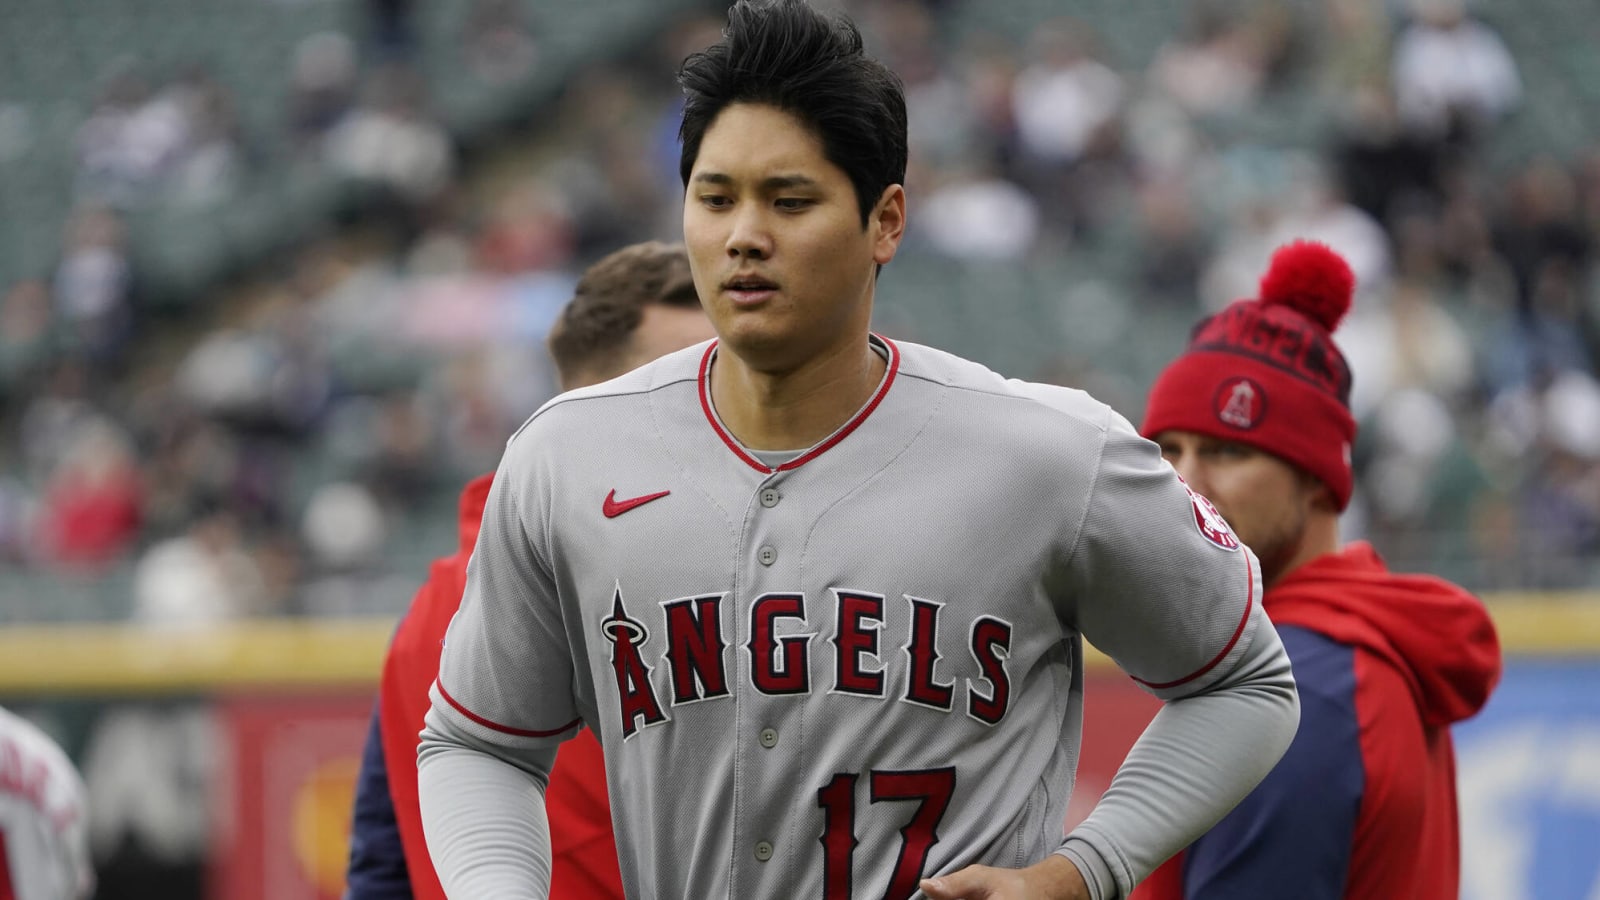 Ohtani not in starting lineup Monday, available to pinch hit